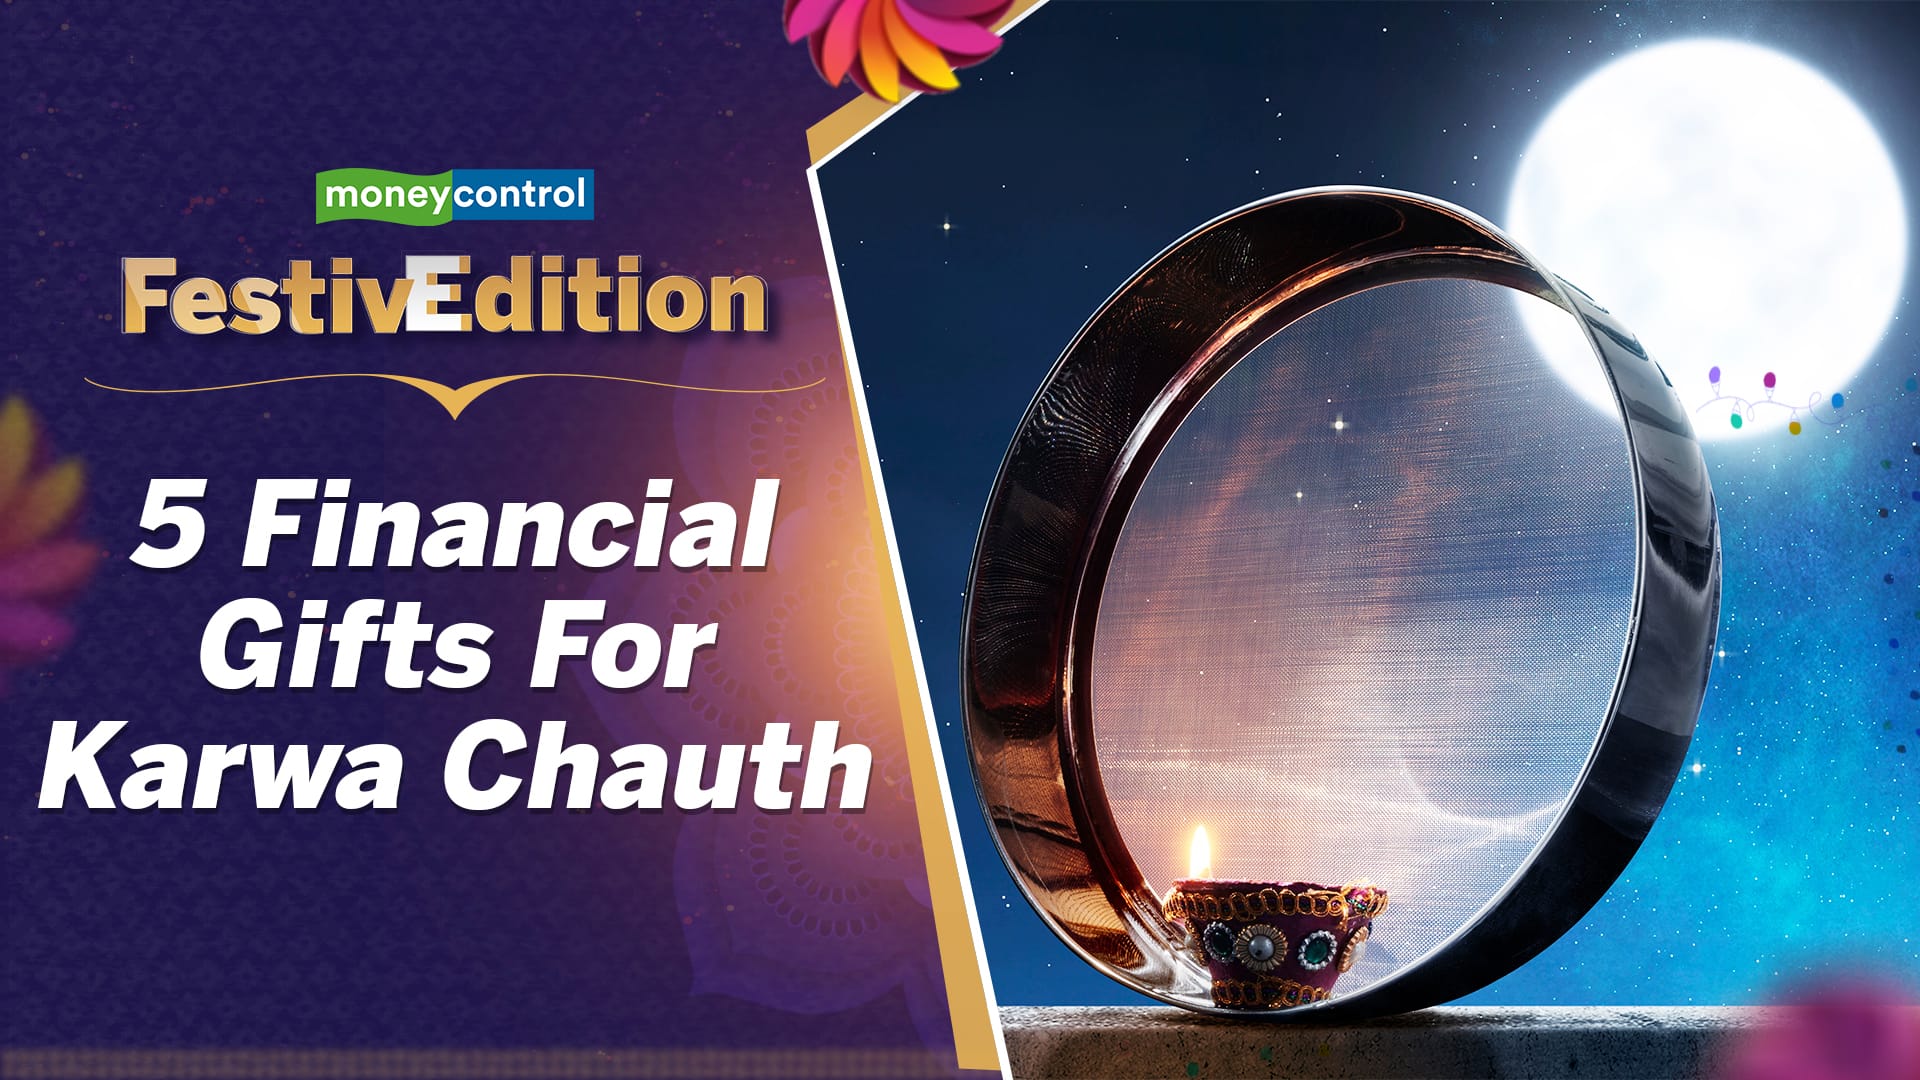 karwa chauth 2022 gifts for wife beautiful and useful gift ideas for  working and home maker wife - करवाचौथ पर वाइफ के लिए यूजफुल गिफ्ट आइडियाज,  वर्किंग या होम मेकर सभी को